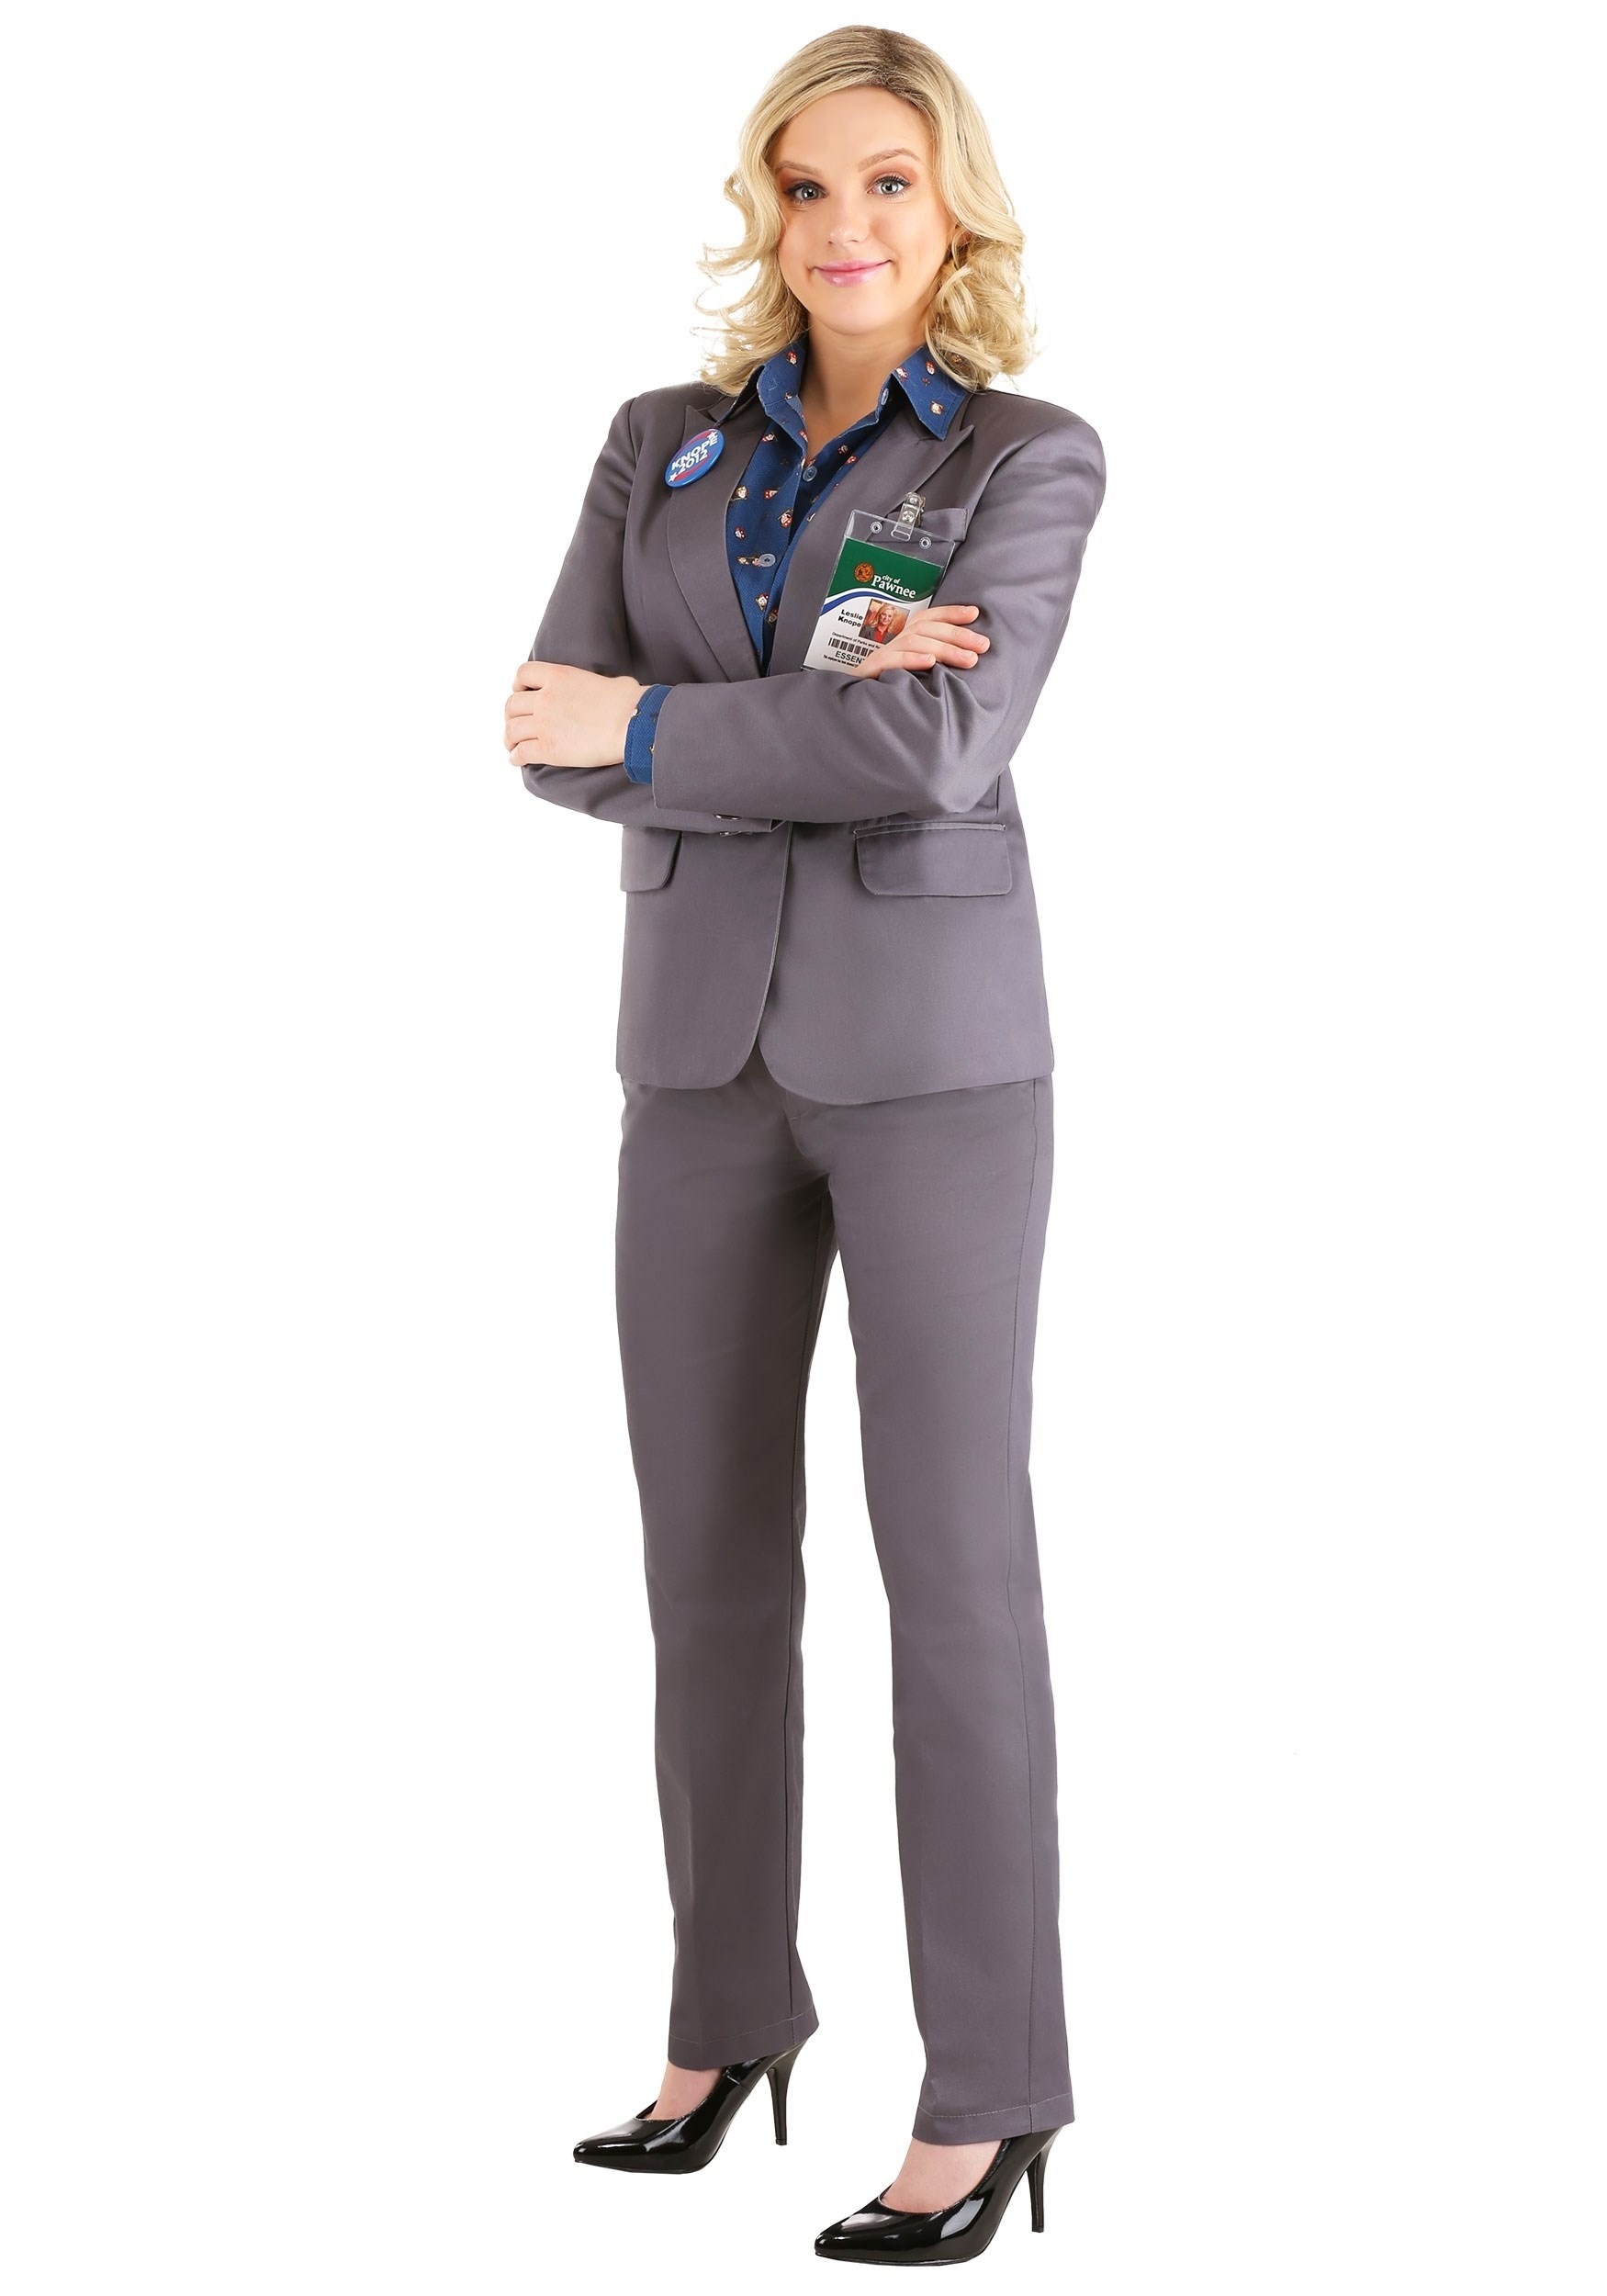 Photos - Fancy Dress A&D FUN Costumes Leslie Knope Parks and Recreation  Costume Gray 